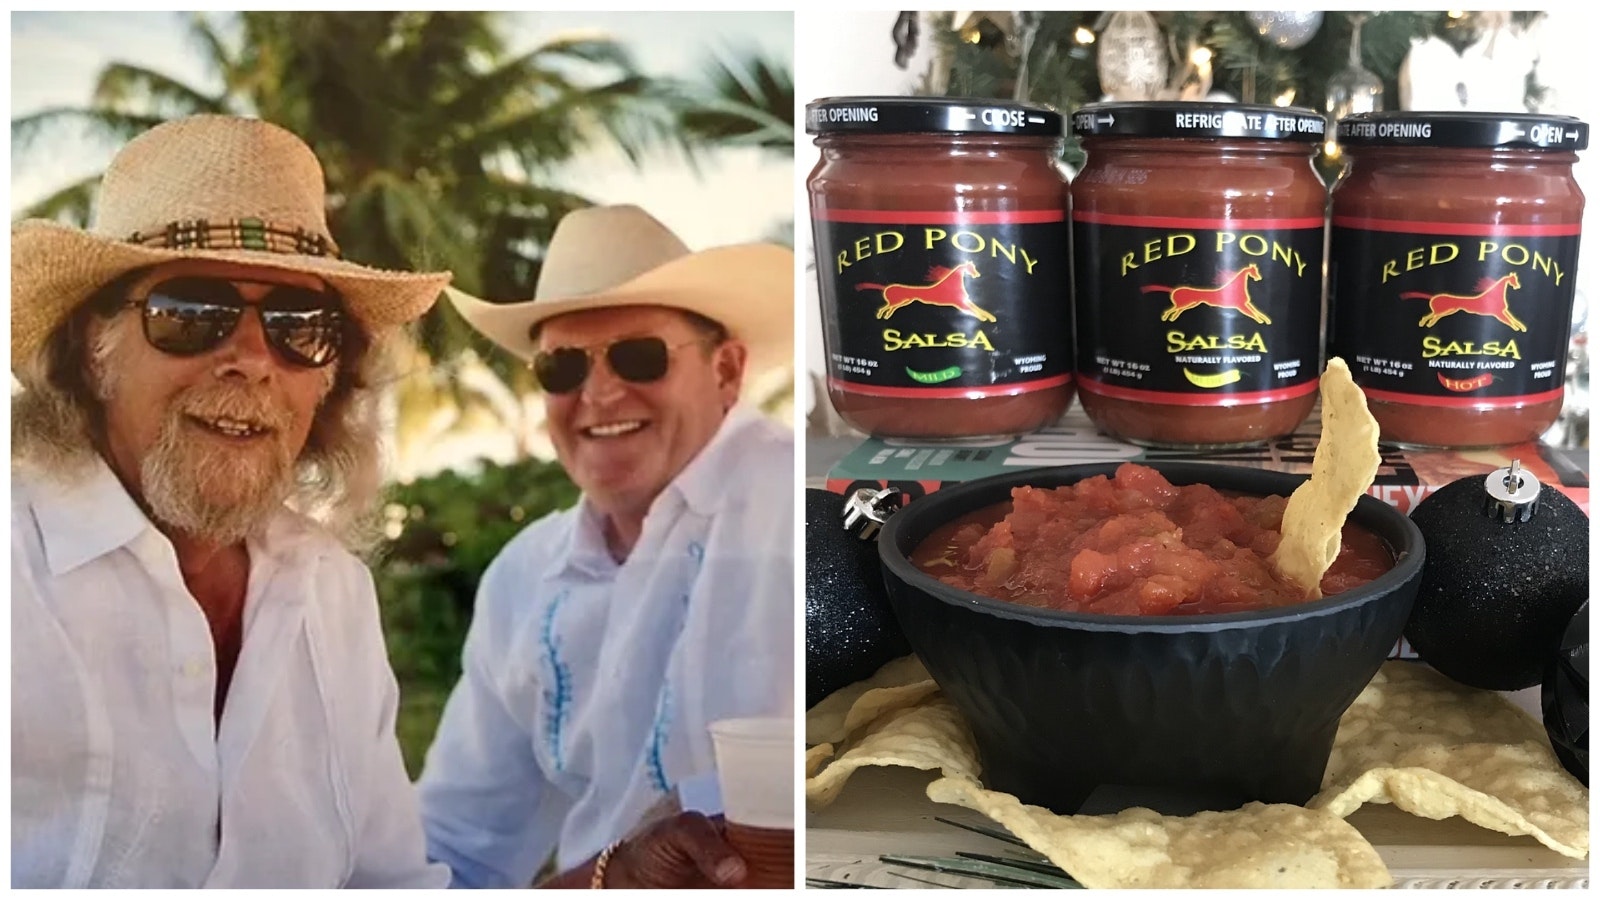 Wyoming grown and made Red Pony Salsa is at the Winter Fancy Food Show in Las Vegas. It's the recipe of Richard Rhoades, far left, and the favorite salsa of Wyoming author Craig Johnson.